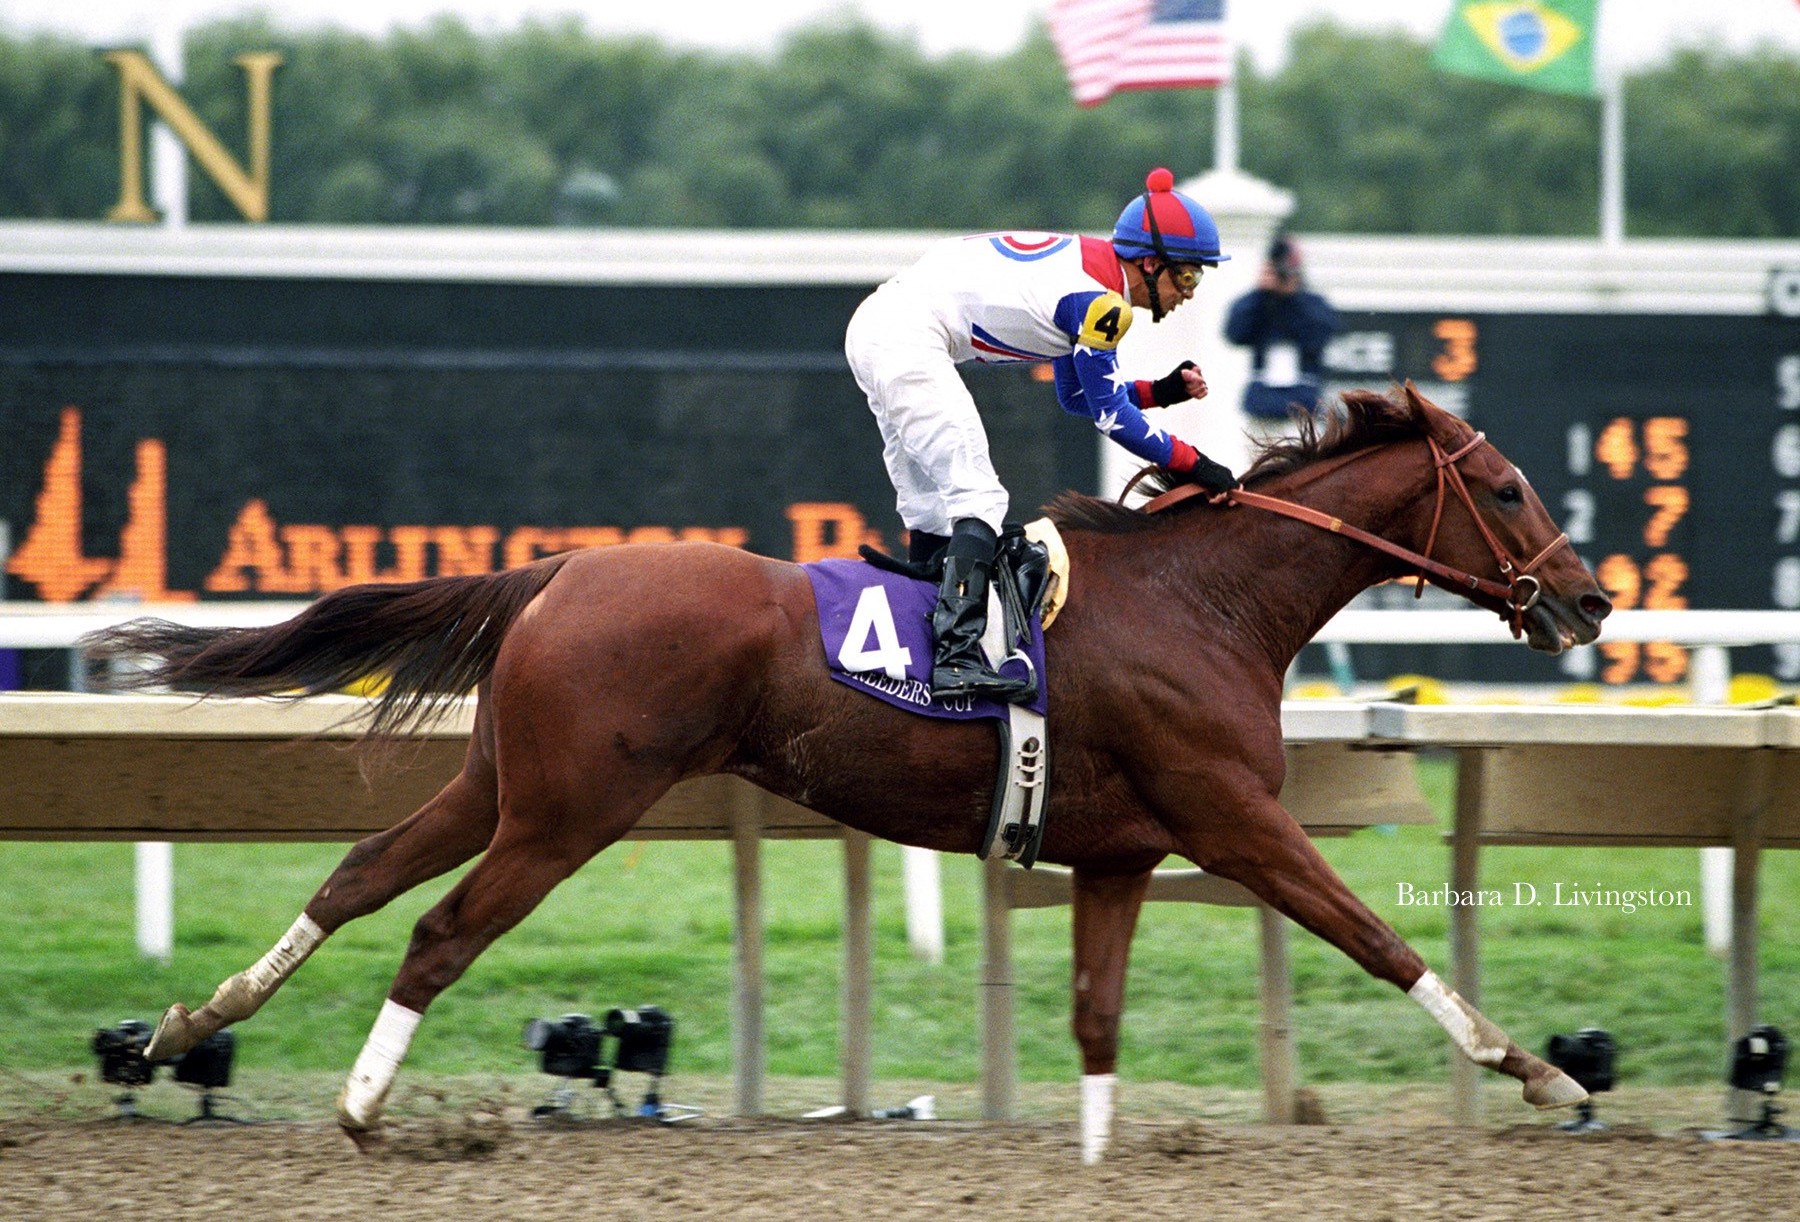 Azeri capped her Horse of the Year campaign with authority in the Breeders' Cup Distaff. Photo: Barbara Livingston